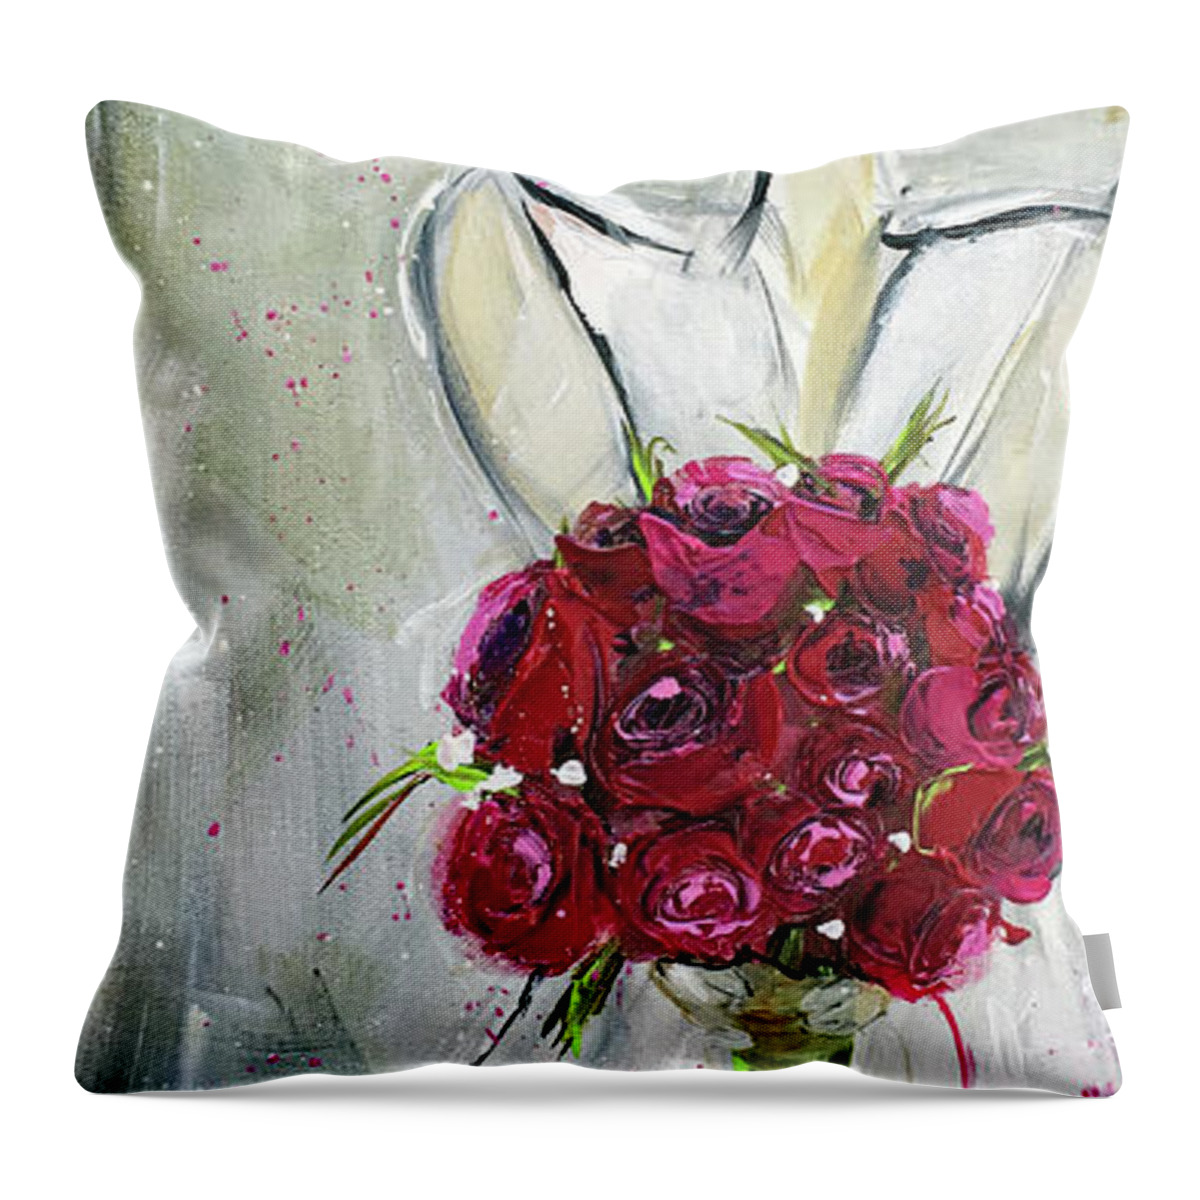 Bride Throw Pillow featuring the painting Blushing Bride by Roxy Rich